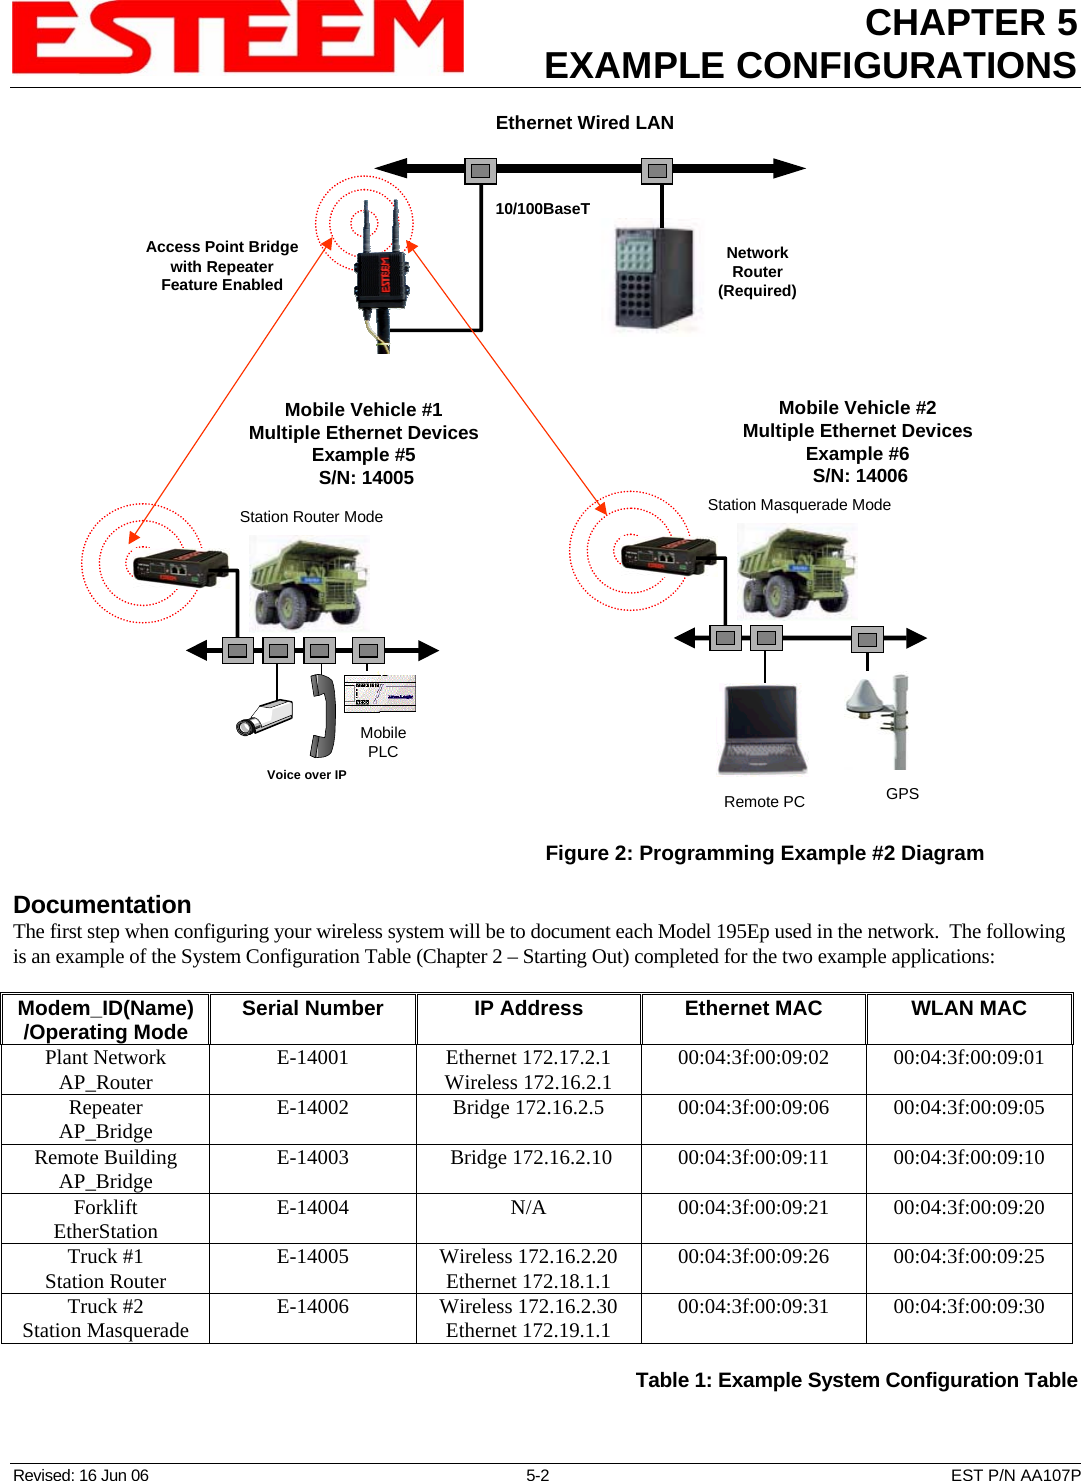 CHAPTER 5 EXAMPLE CONFIGURATIONS    Revised: 16 Jun 06  5-2  EST P/N AA107P MobilePLCStation Router ModeVoice over IPMobile Vehicle #1Multiple Ethernet DevicesExample #5 S/N: 14005Mobile Vehicle #2Multiple Ethernet DevicesExample #6 S/N: 14006Station Masquerade ModeRemote PC GPS10/100BaseTAccess Point Bridgewith RepeaterFeature EnabledEthernet Wired LANNetworkRouter(Required)  Figure 2: Programming Example #2 Diagram  Documentation The first step when configuring your wireless system will be to document each Model 195Ep used in the network.  The following is an example of the System Configuration Table (Chapter 2 – Starting Out) completed for the two example applications:   Modem_ID(Name) /Operating Mode  Serial Number  IP Address  Ethernet MAC  WLAN MAC Plant Network AP_Router  E-14001 Ethernet 172.17.2.1 Wireless 172.16.2.1  00:04:3f:00:09:02 00:04:3f:00:09:01 Repeater AP_Bridge  E-14002 Bridge 172.16.2.5 00:04:3f:00:09:06 00:04:3f:00:09:05 Remote Building AP_Bridge  E-14003   Bridge 172.16.2.10  00:04:3f:00:09:11  00:04:3f:00:09:10 Forklift EtherStation  E-14004 N/A 00:04:3f:00:09:21 00:04:3f:00:09:20 Truck #1 Station Router  E-14005 Wireless 172.16.2.20 Ethernet 172.18.1.1  00:04:3f:00:09:26 00:04:3f:00:09:25 Truck #2 Station Masquerade  E-14006 Wireless 172.16.2.30 Ethernet 172.19.1.1  00:04:3f:00:09:31 00:04:3f:00:09:30  Table 1: Example System Configuration Table  